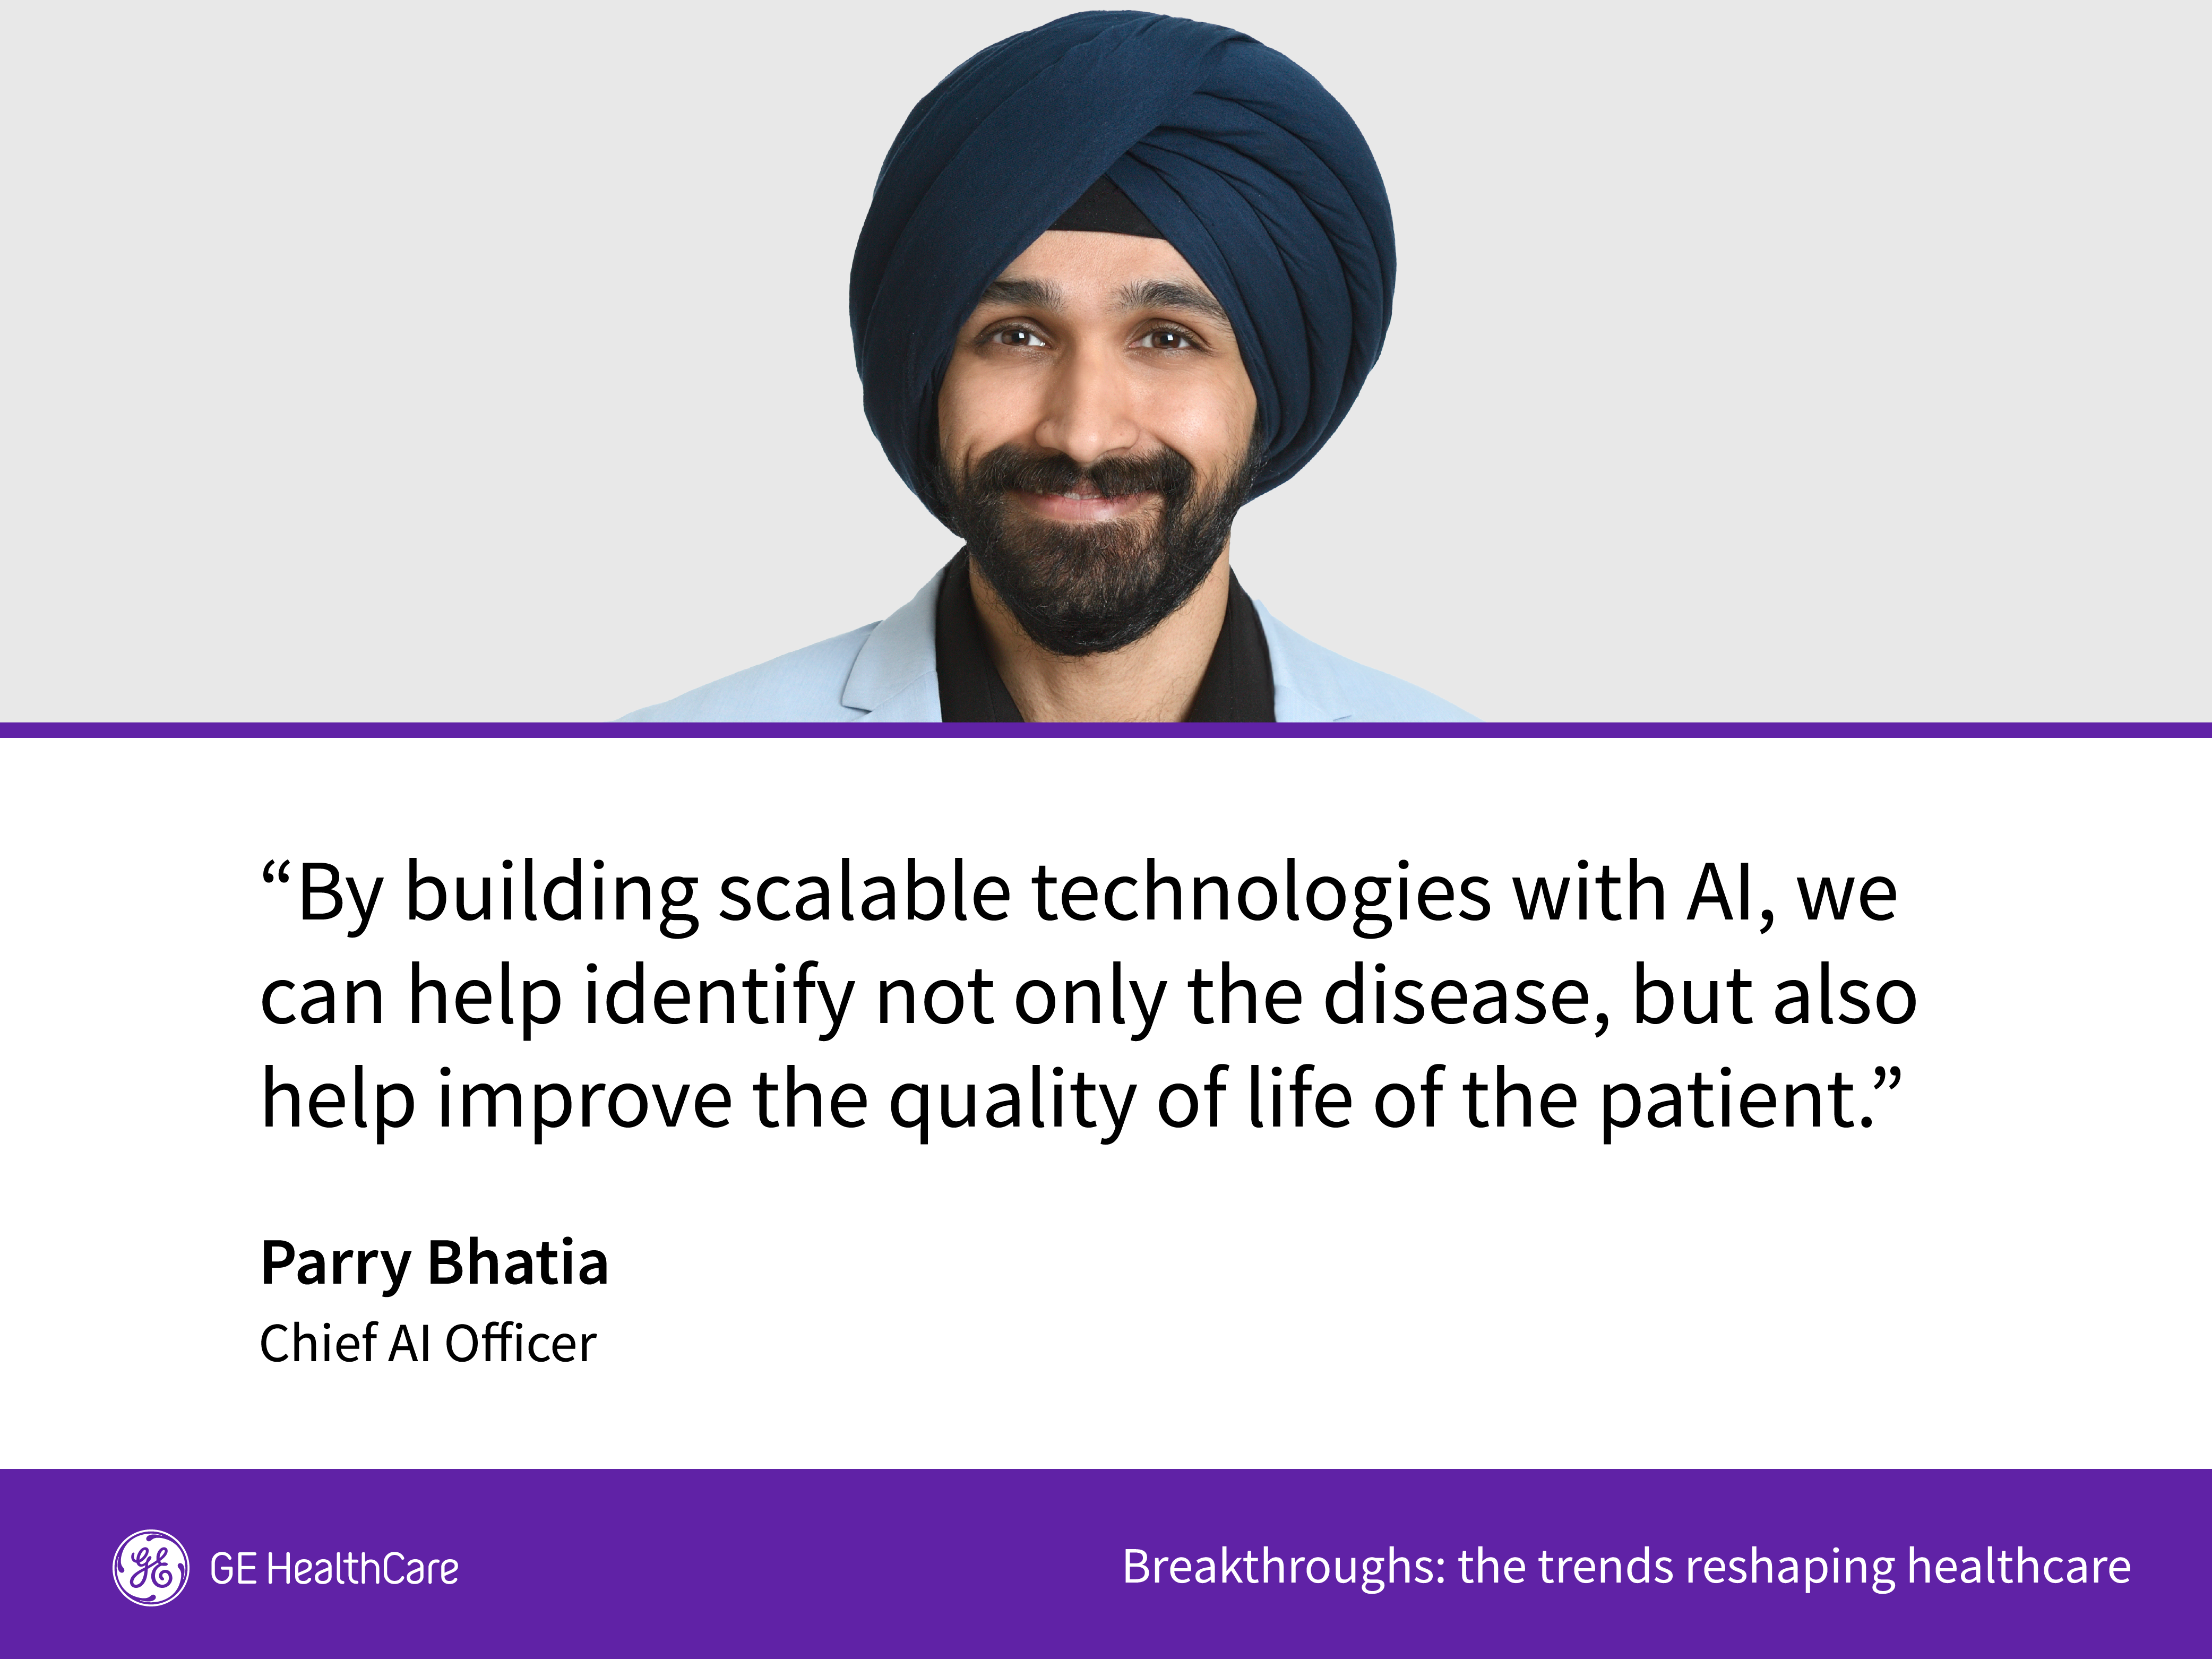 Pary Bhatia "By building scalable technologies with AI, we can help identify not only the disease, but also help improve the quality of life of the patient."